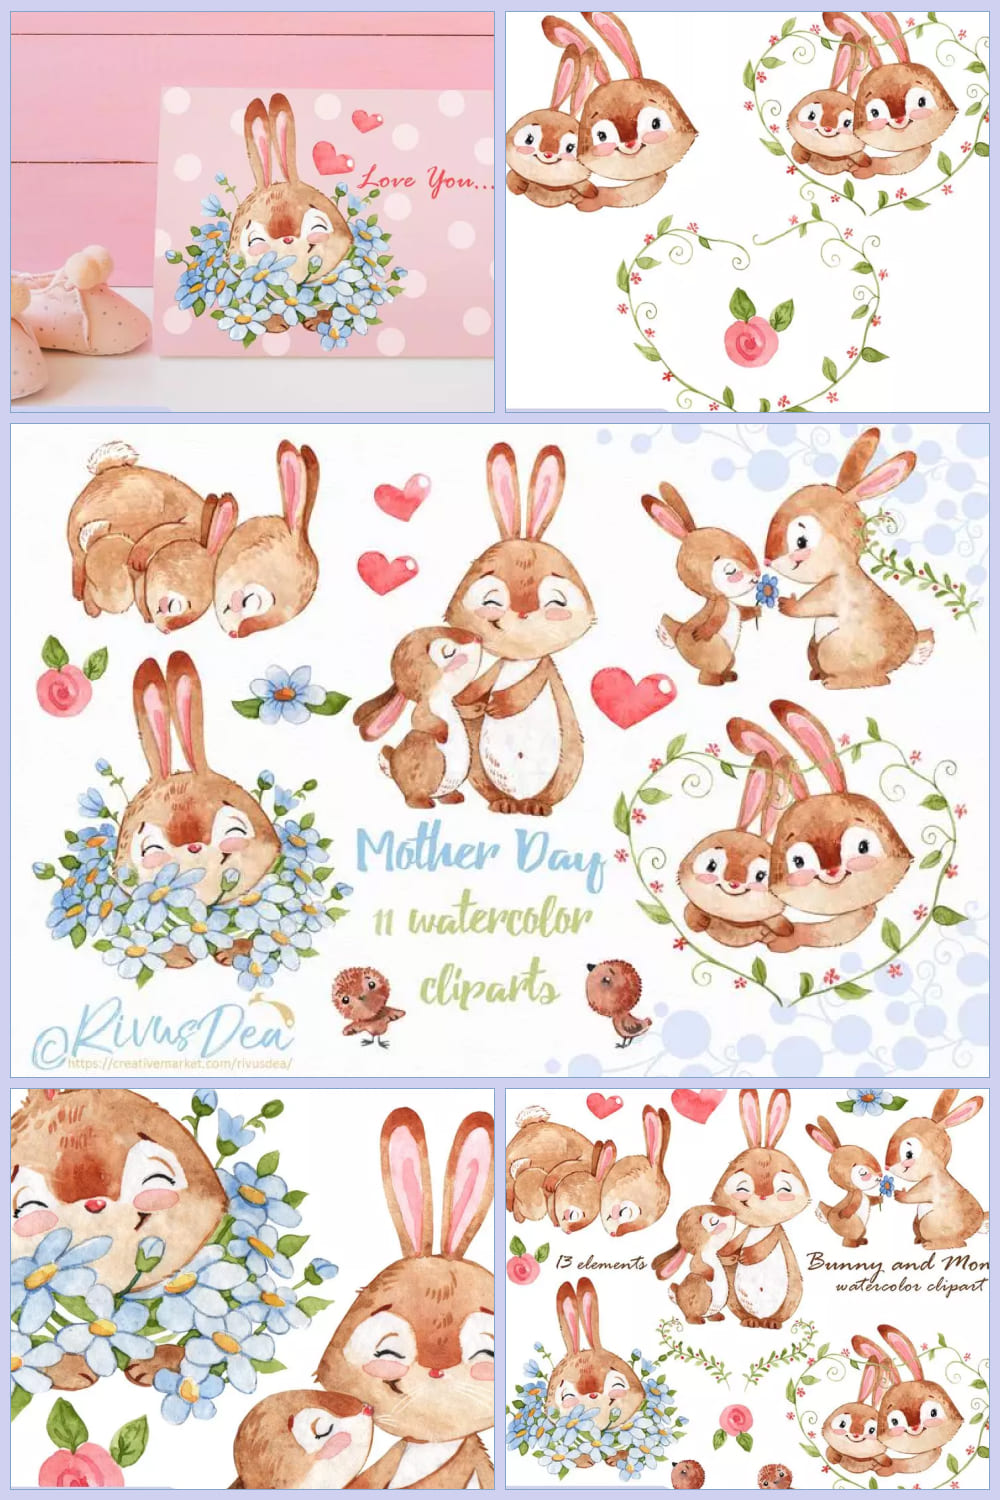 Hare with a little bunny. On the template, they hug and kiss, show their love.